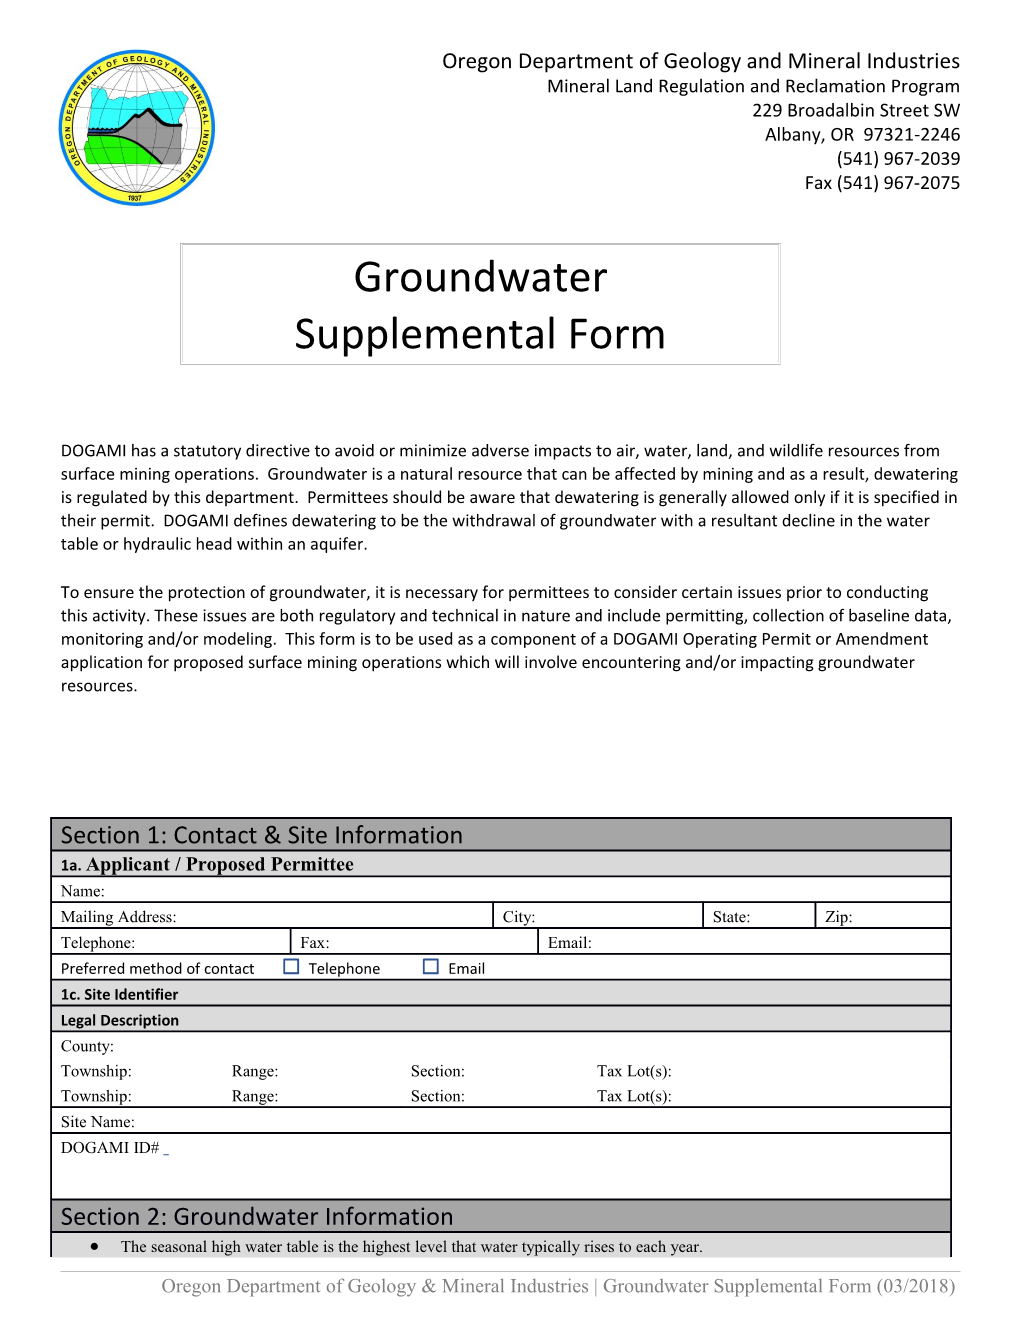 Groundwater Supplemental Form